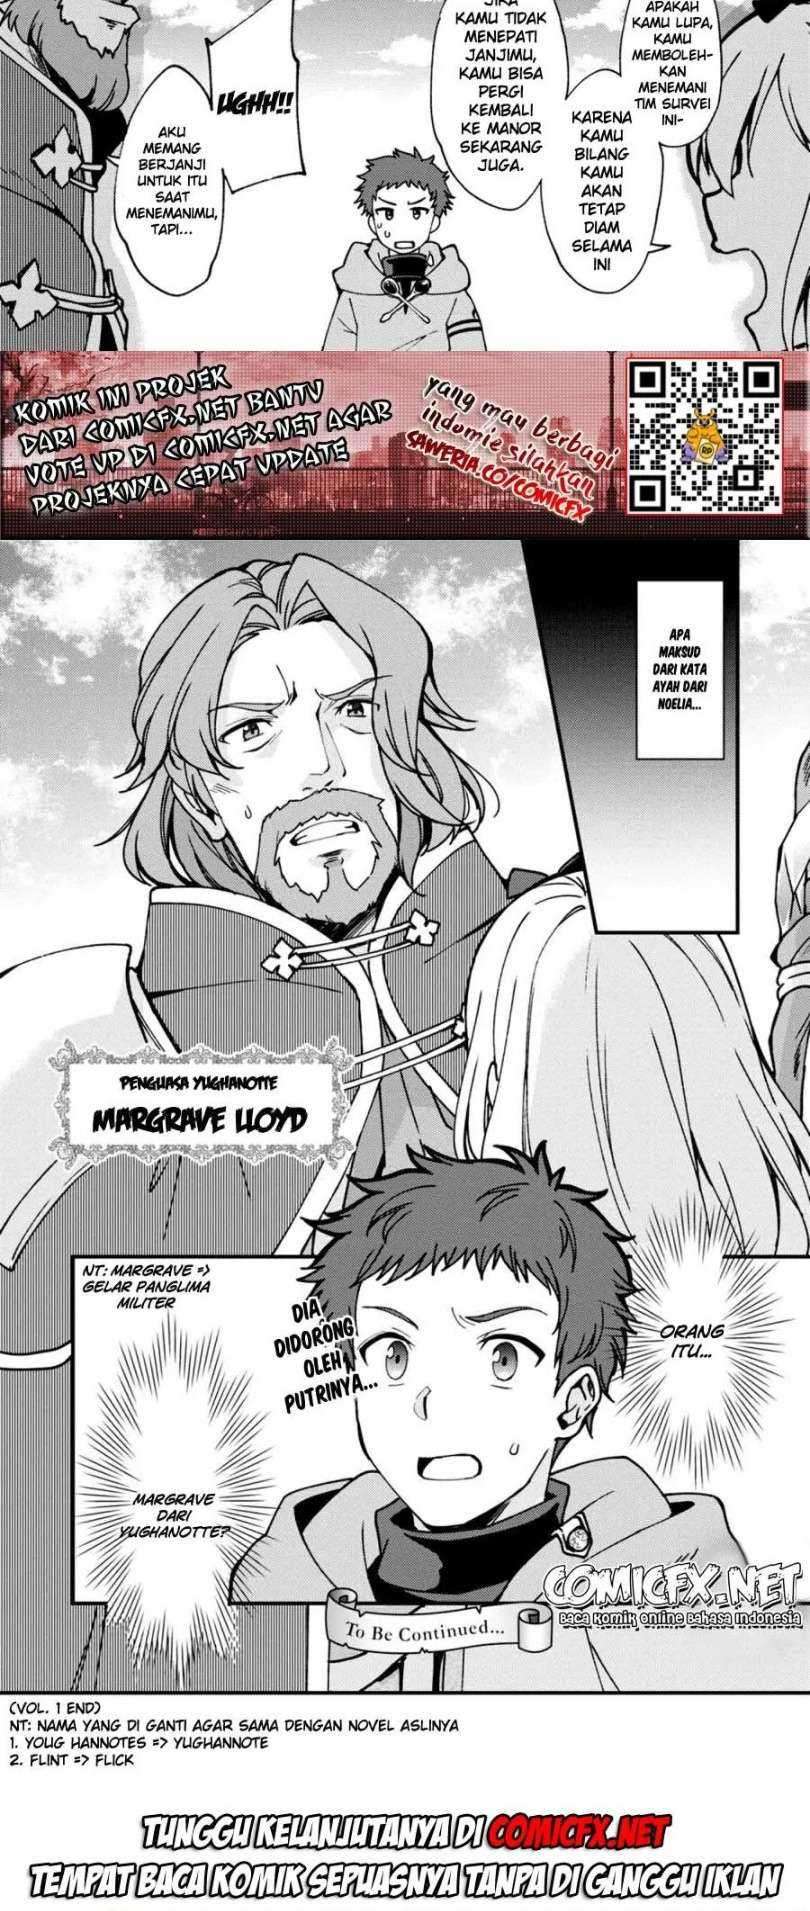 A Sword Master Childhood Friend Power Harassed Me Harshly, So I Broke off Our Relationship and Make a Fresh Start at the Frontier as a Magic Swordsman Chapter 05.2 6